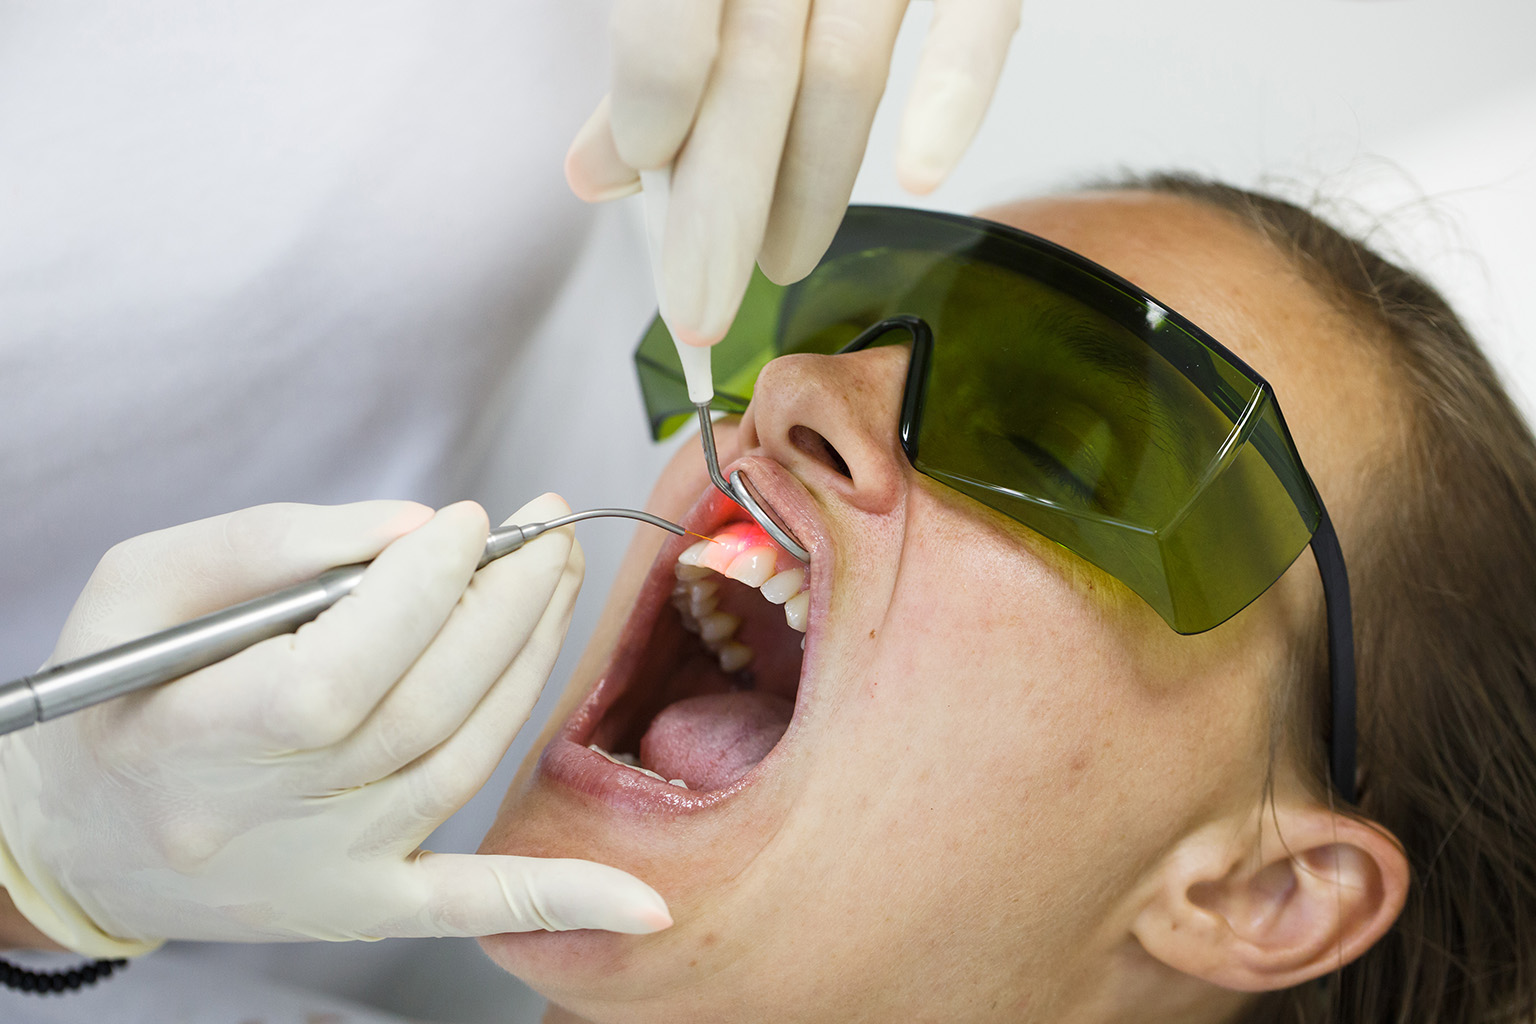 gloved hands performing  laser teeth cleaning on patient wearing eye protection